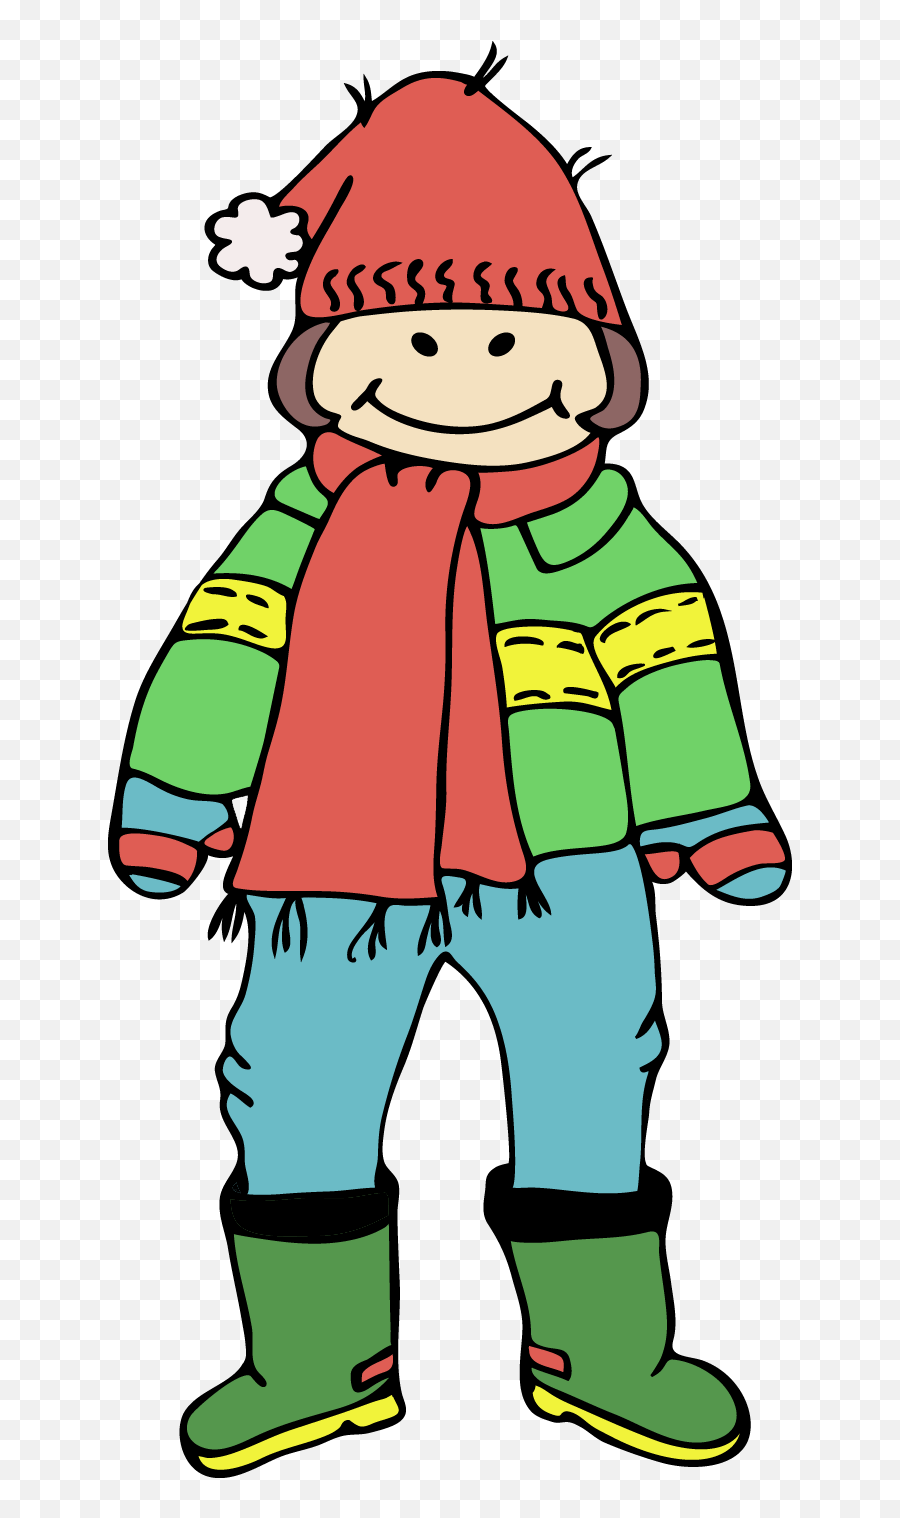 Free Winter Clothing Images Download Free Clip Art Free - Winter Clothes Clipart Emoji,Emoji Dress For Kids